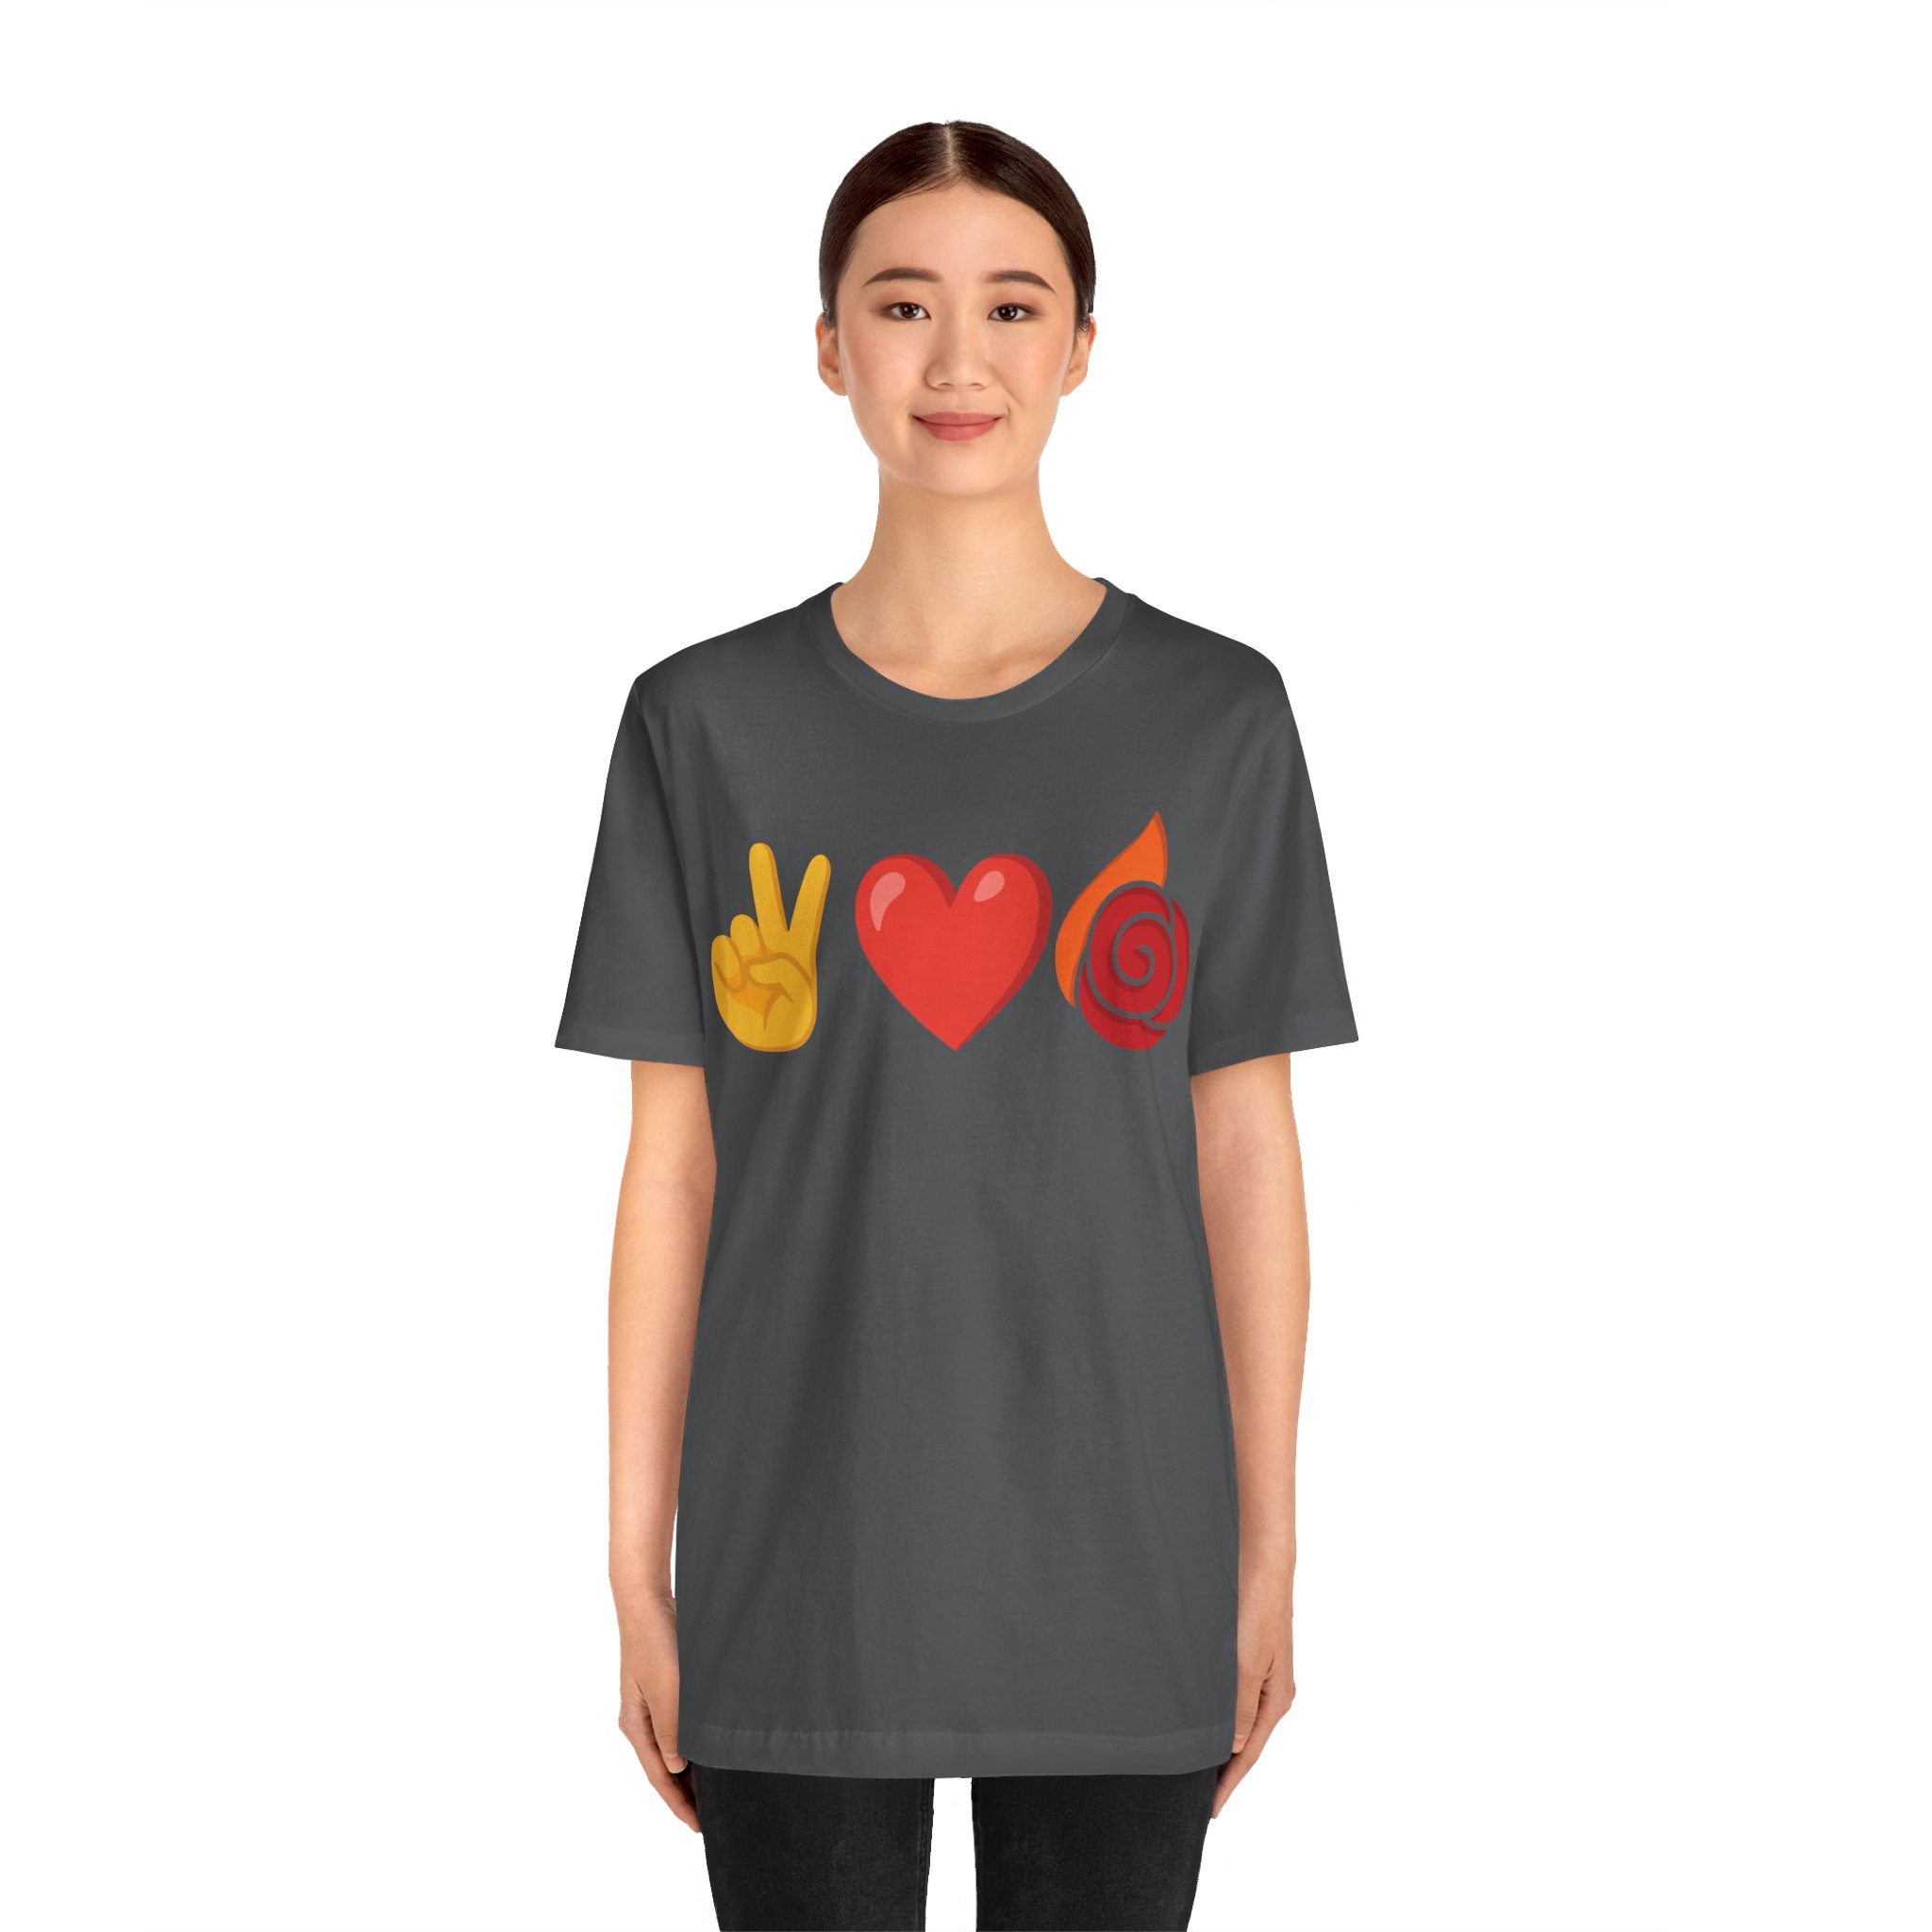 Spellboundfire T-shirt, Peace, Love, Spellboundfire